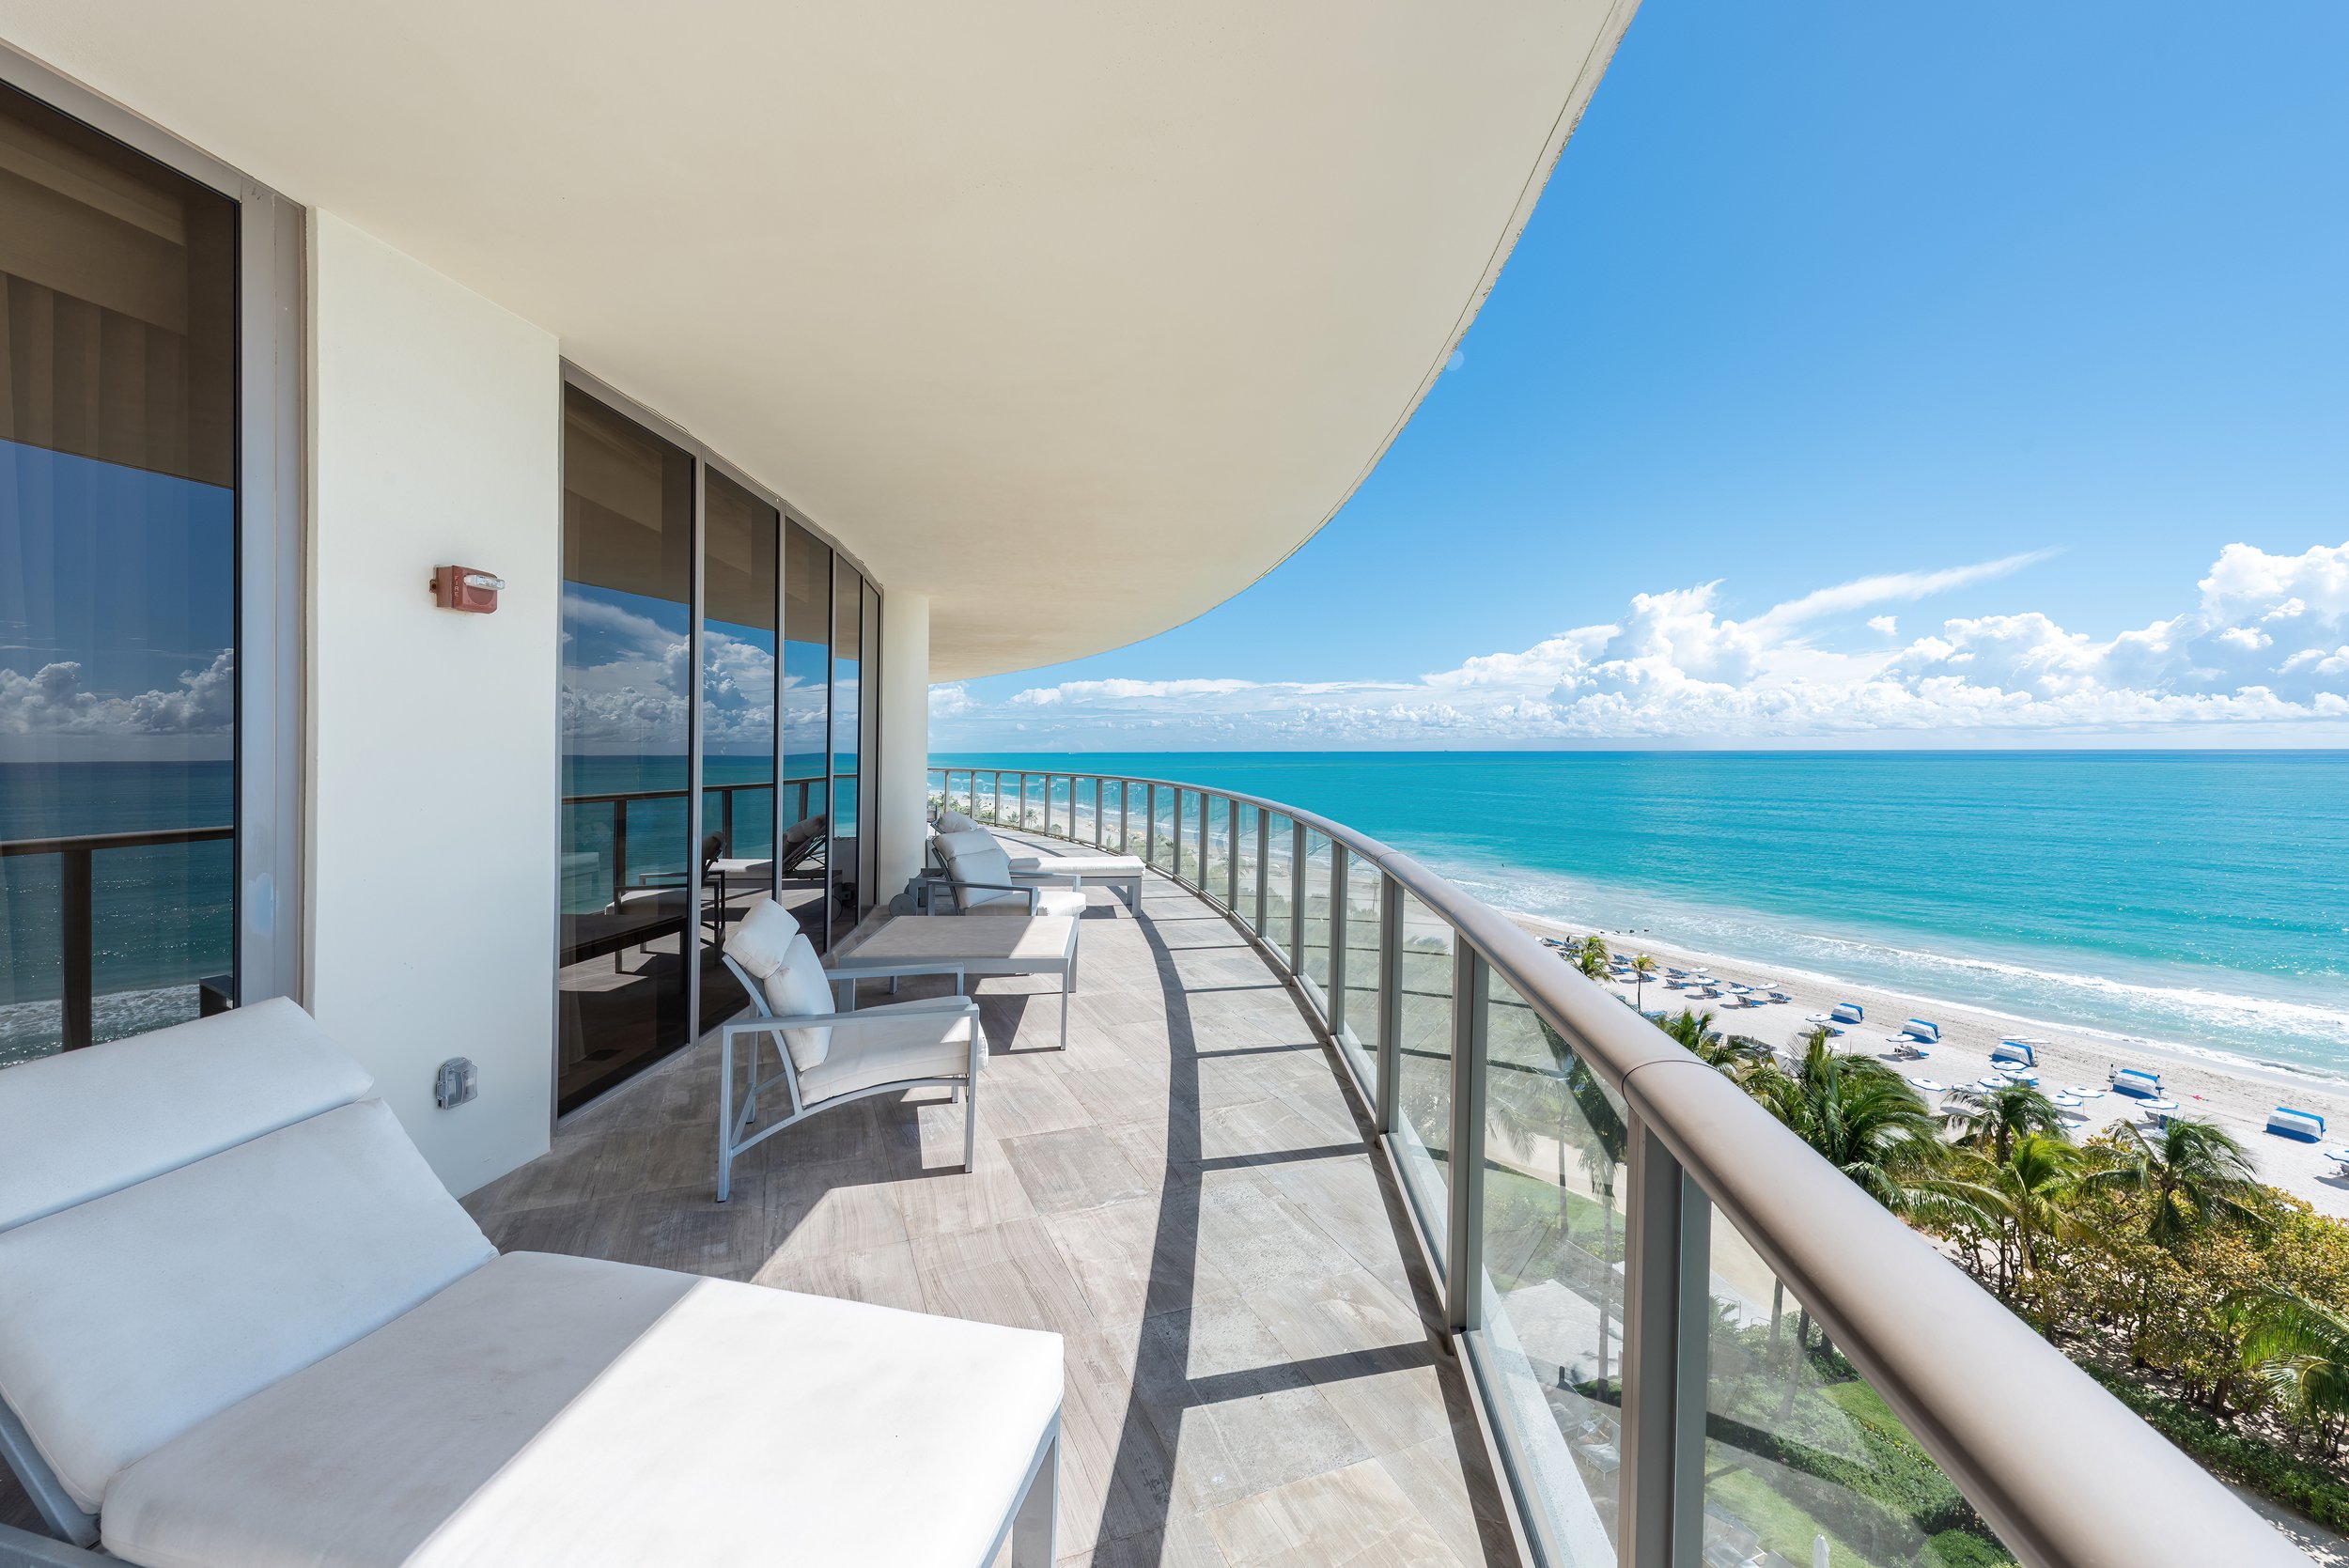 Master Brokers Forum Listing: See The Views From This Beachfront Condo In St. Regis Bal Harbour Asking $10.995 Million 4.JPG